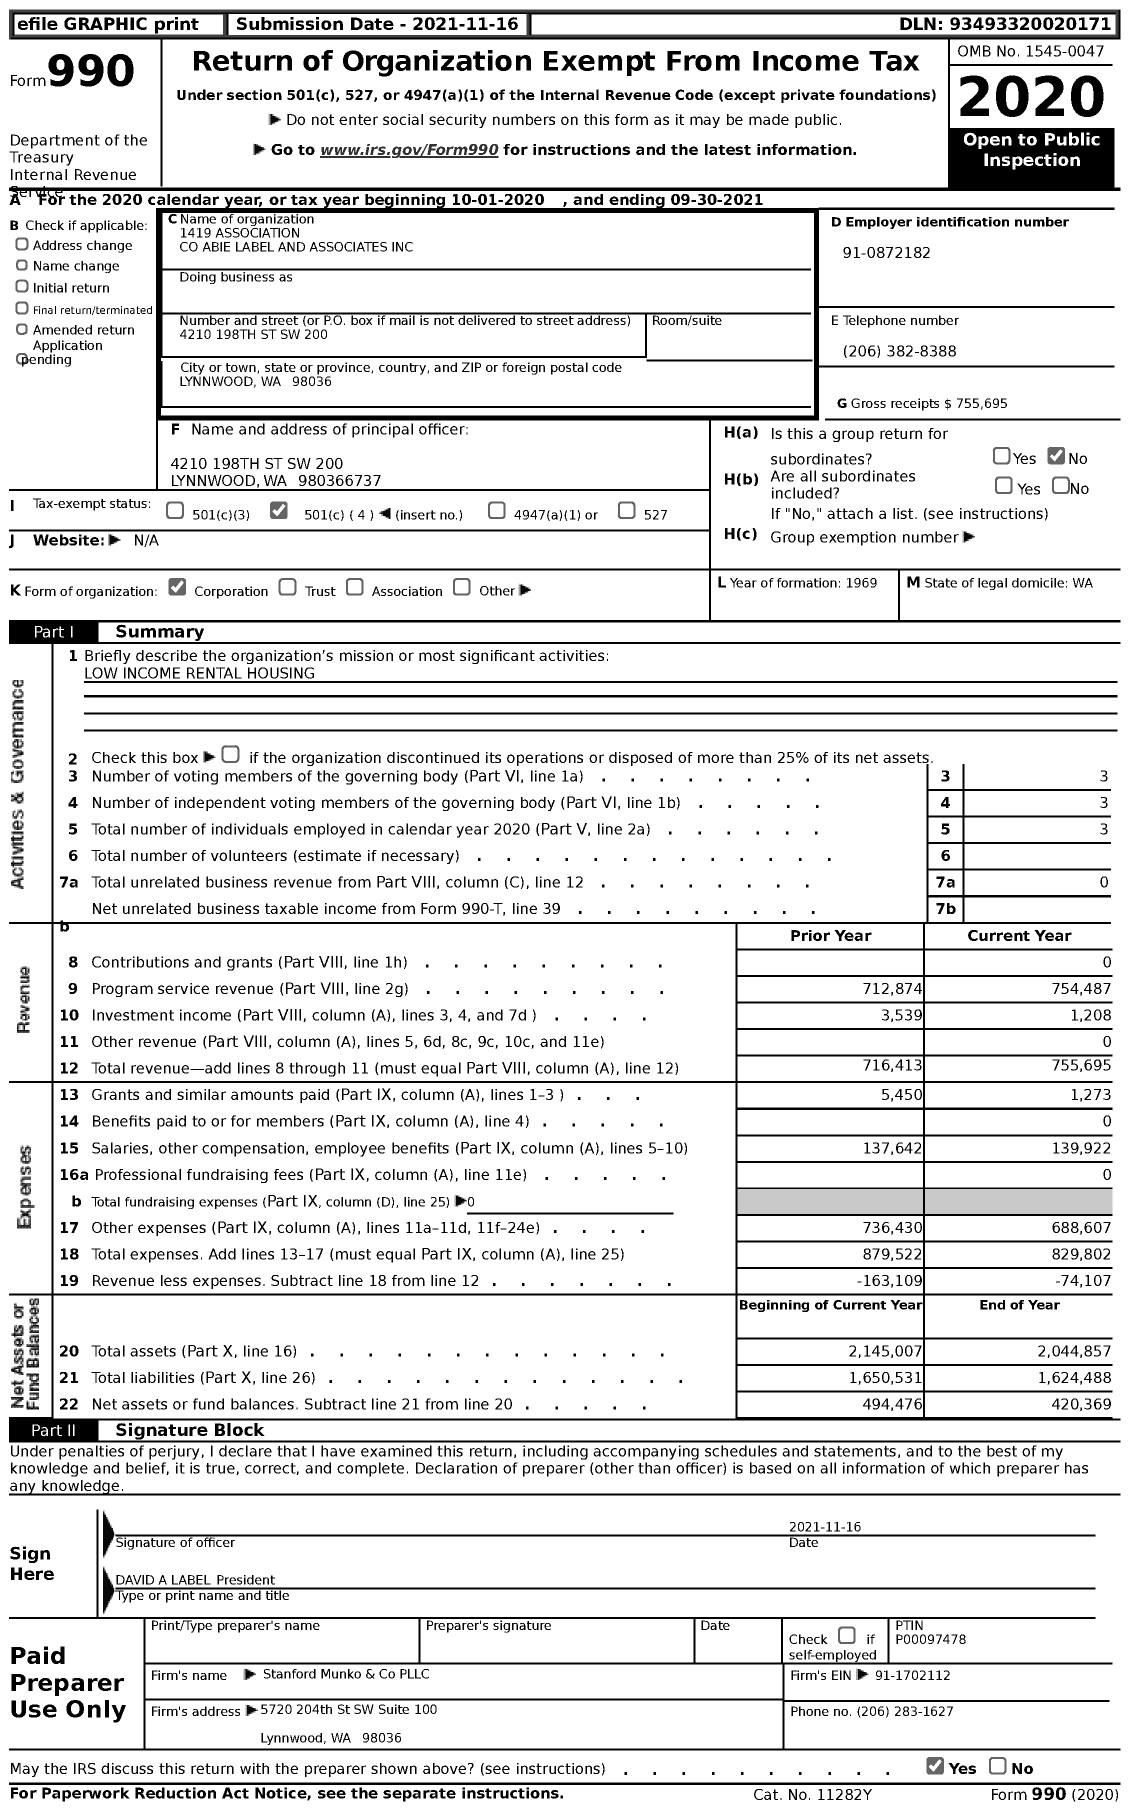 Image of first page of 2020 Form 990 for 1419 Association